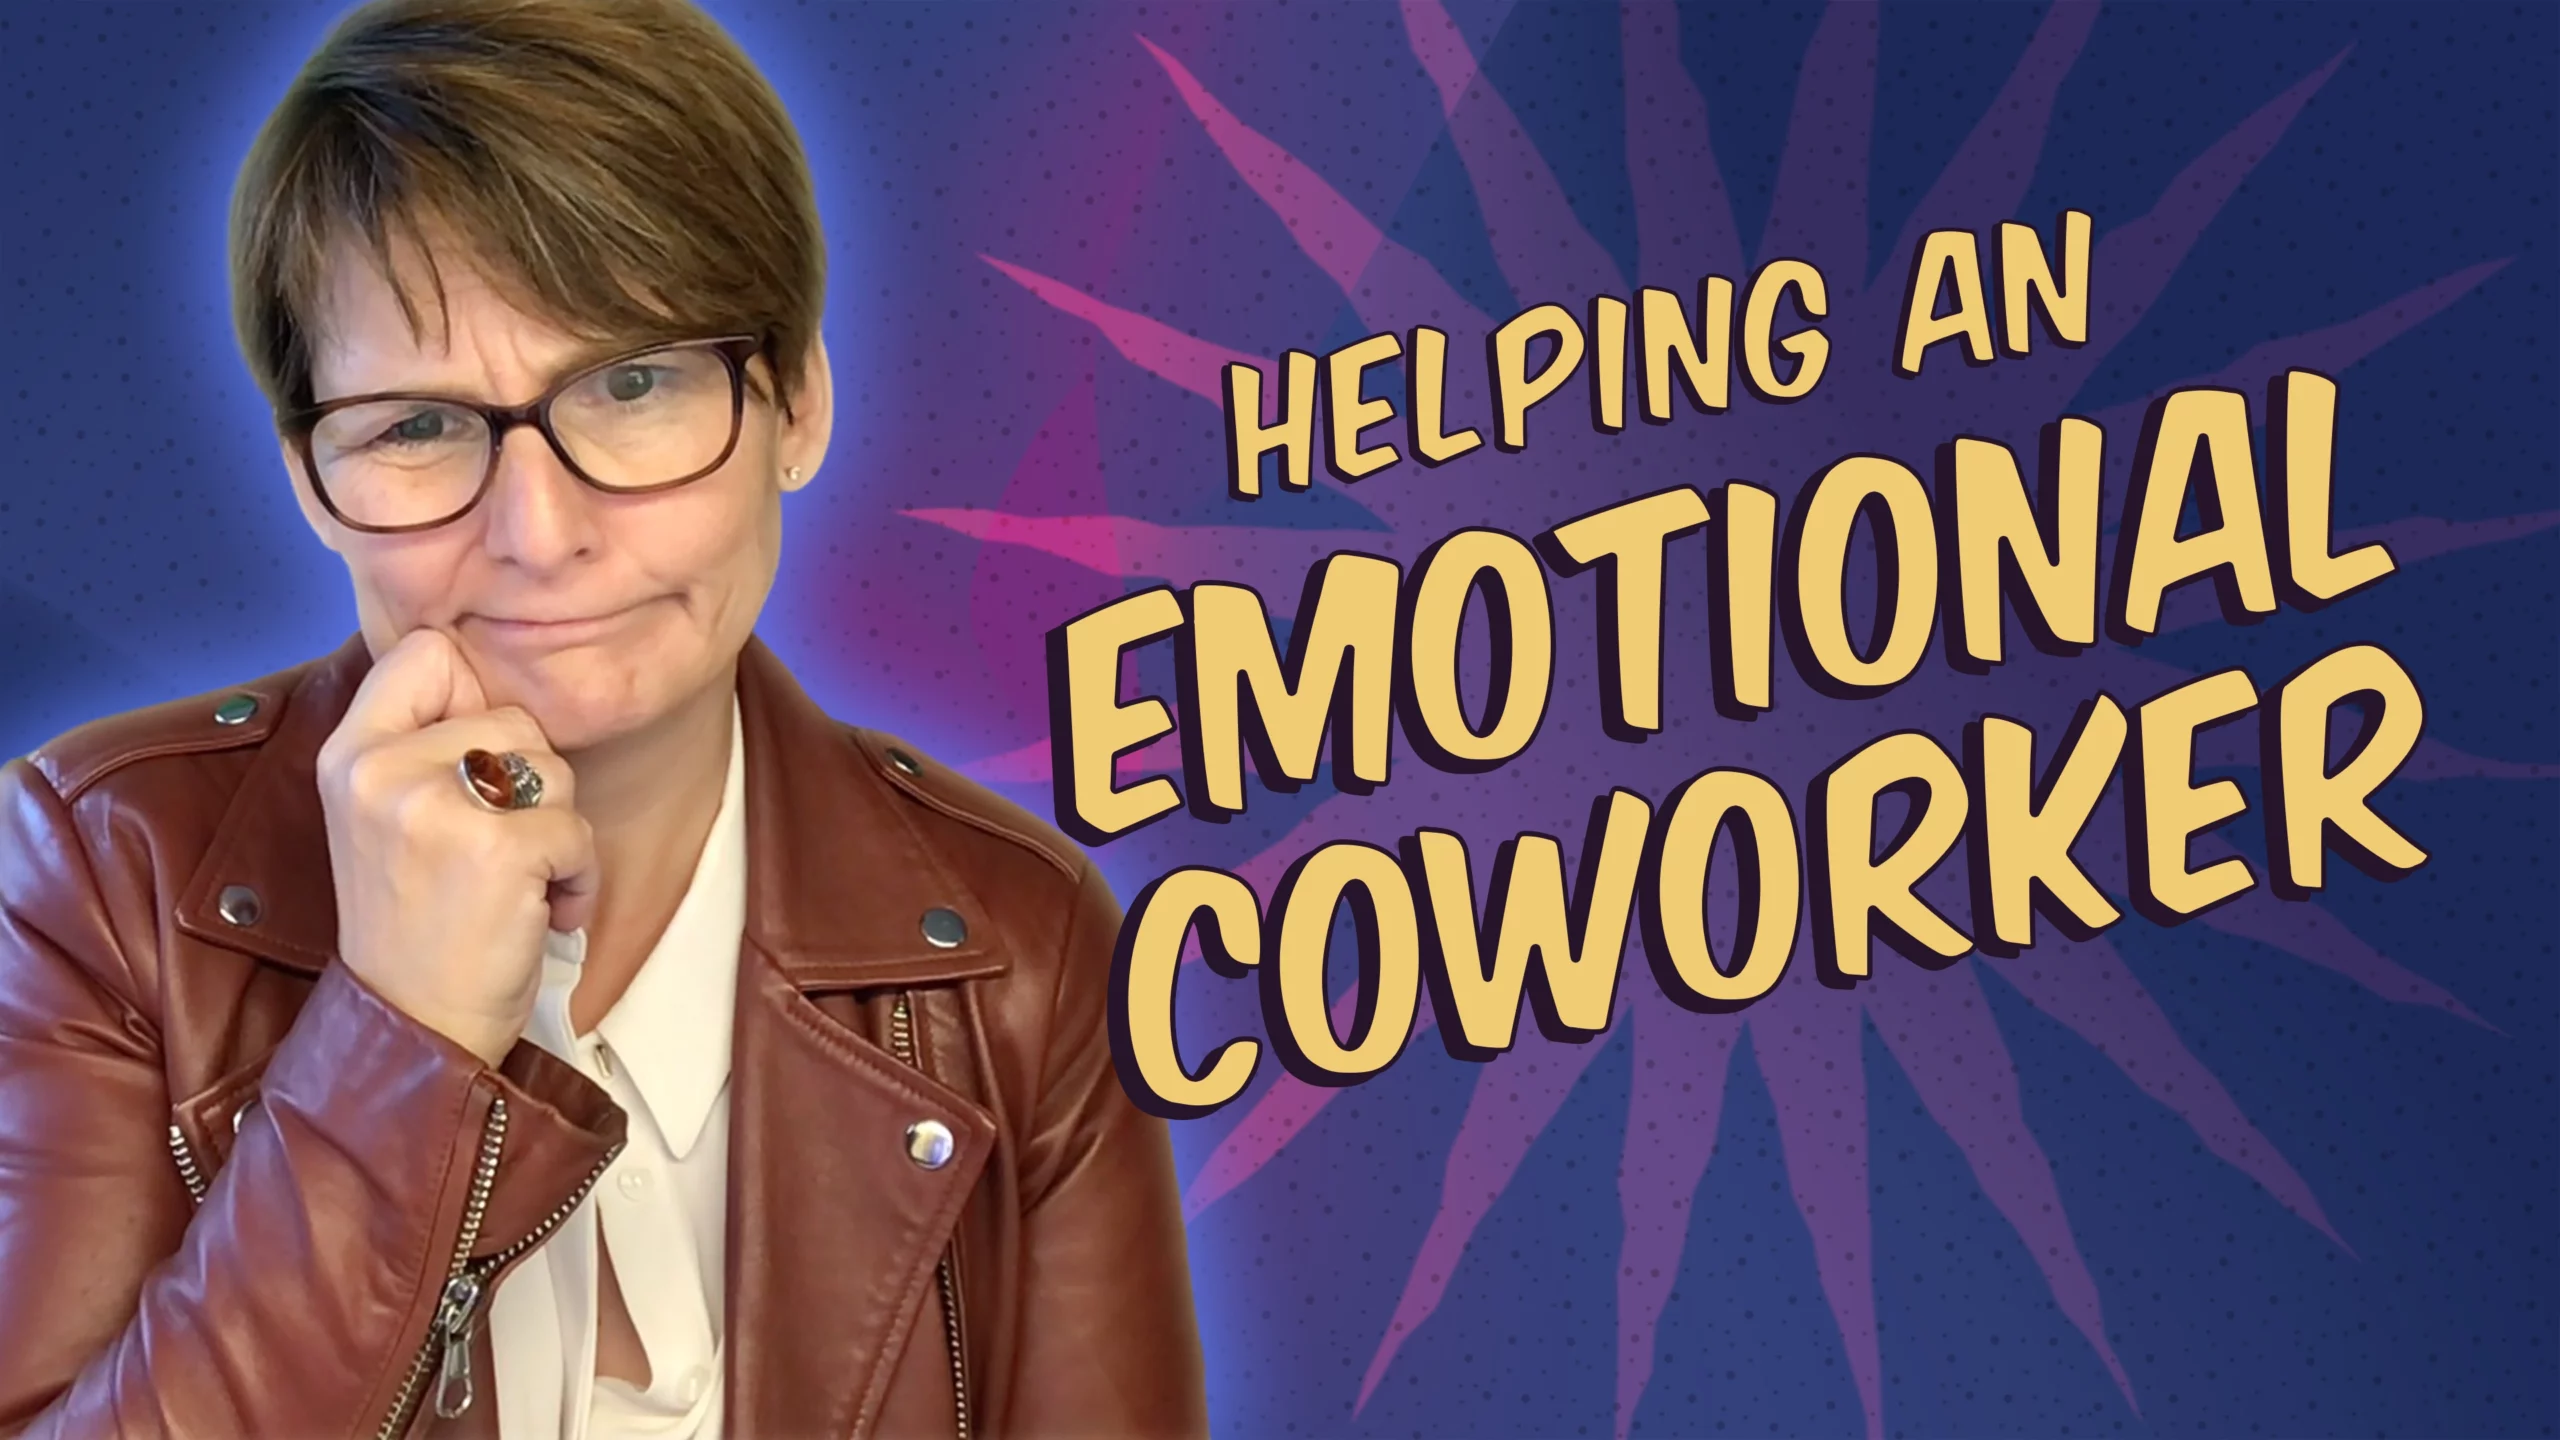 Helping an Emotional Coworker with Liane Davey